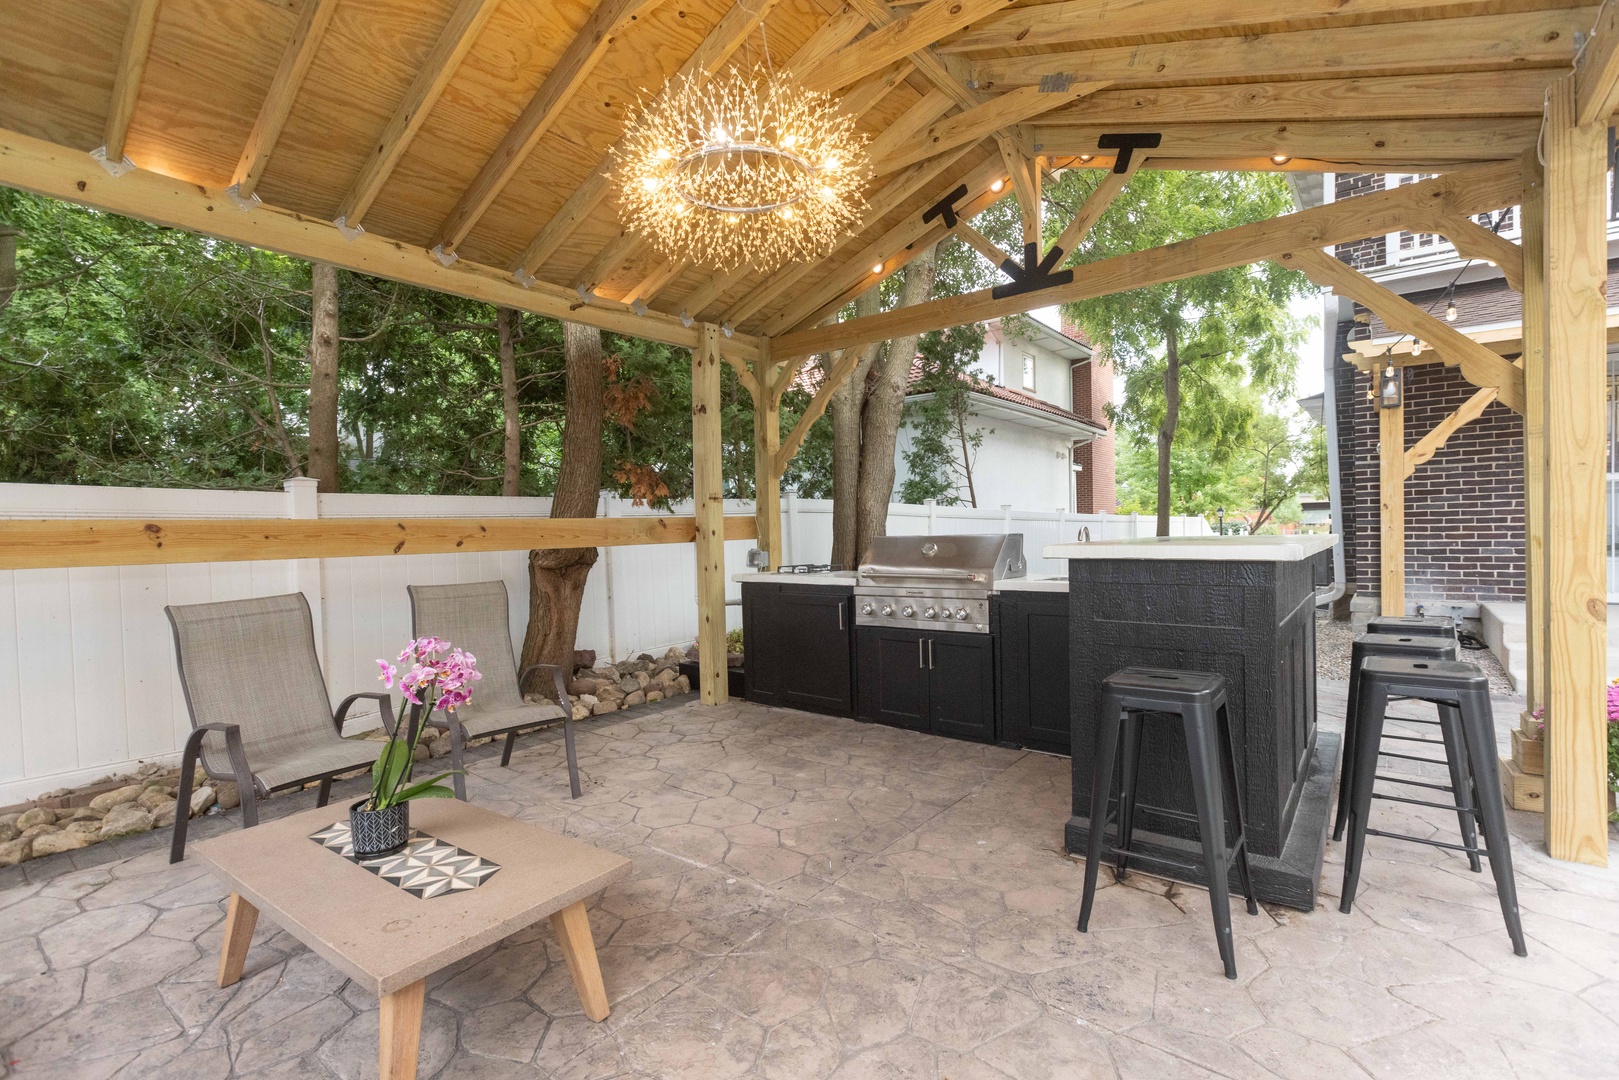 Whip up a feast & visit together in the outdoor kitchen area